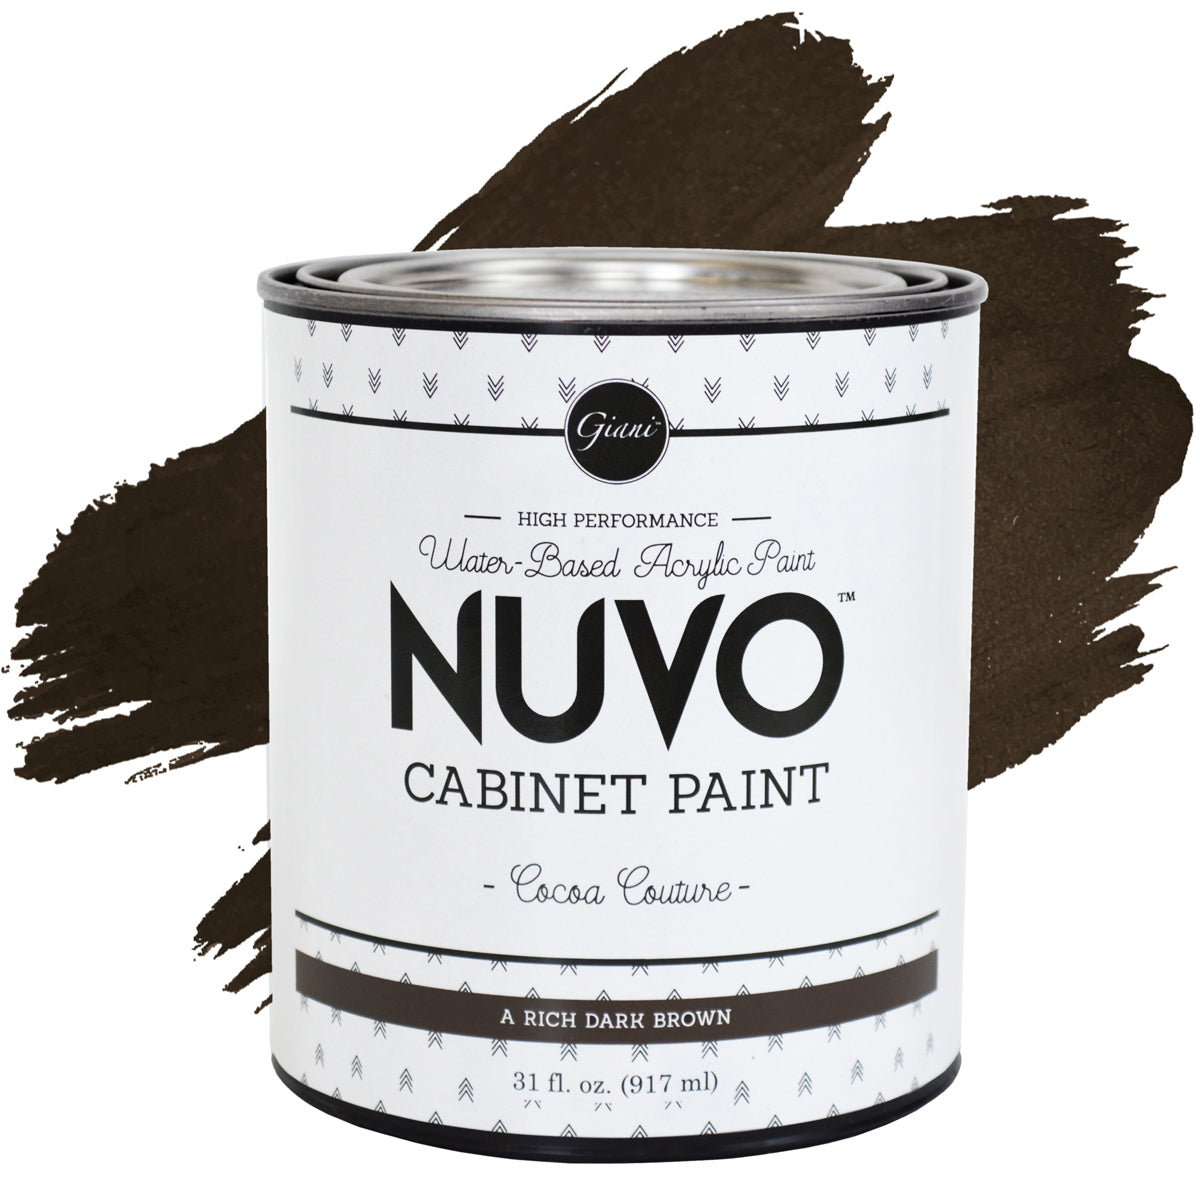 Nuvo Cocoa Couture Cabinet Paint Giani Inc